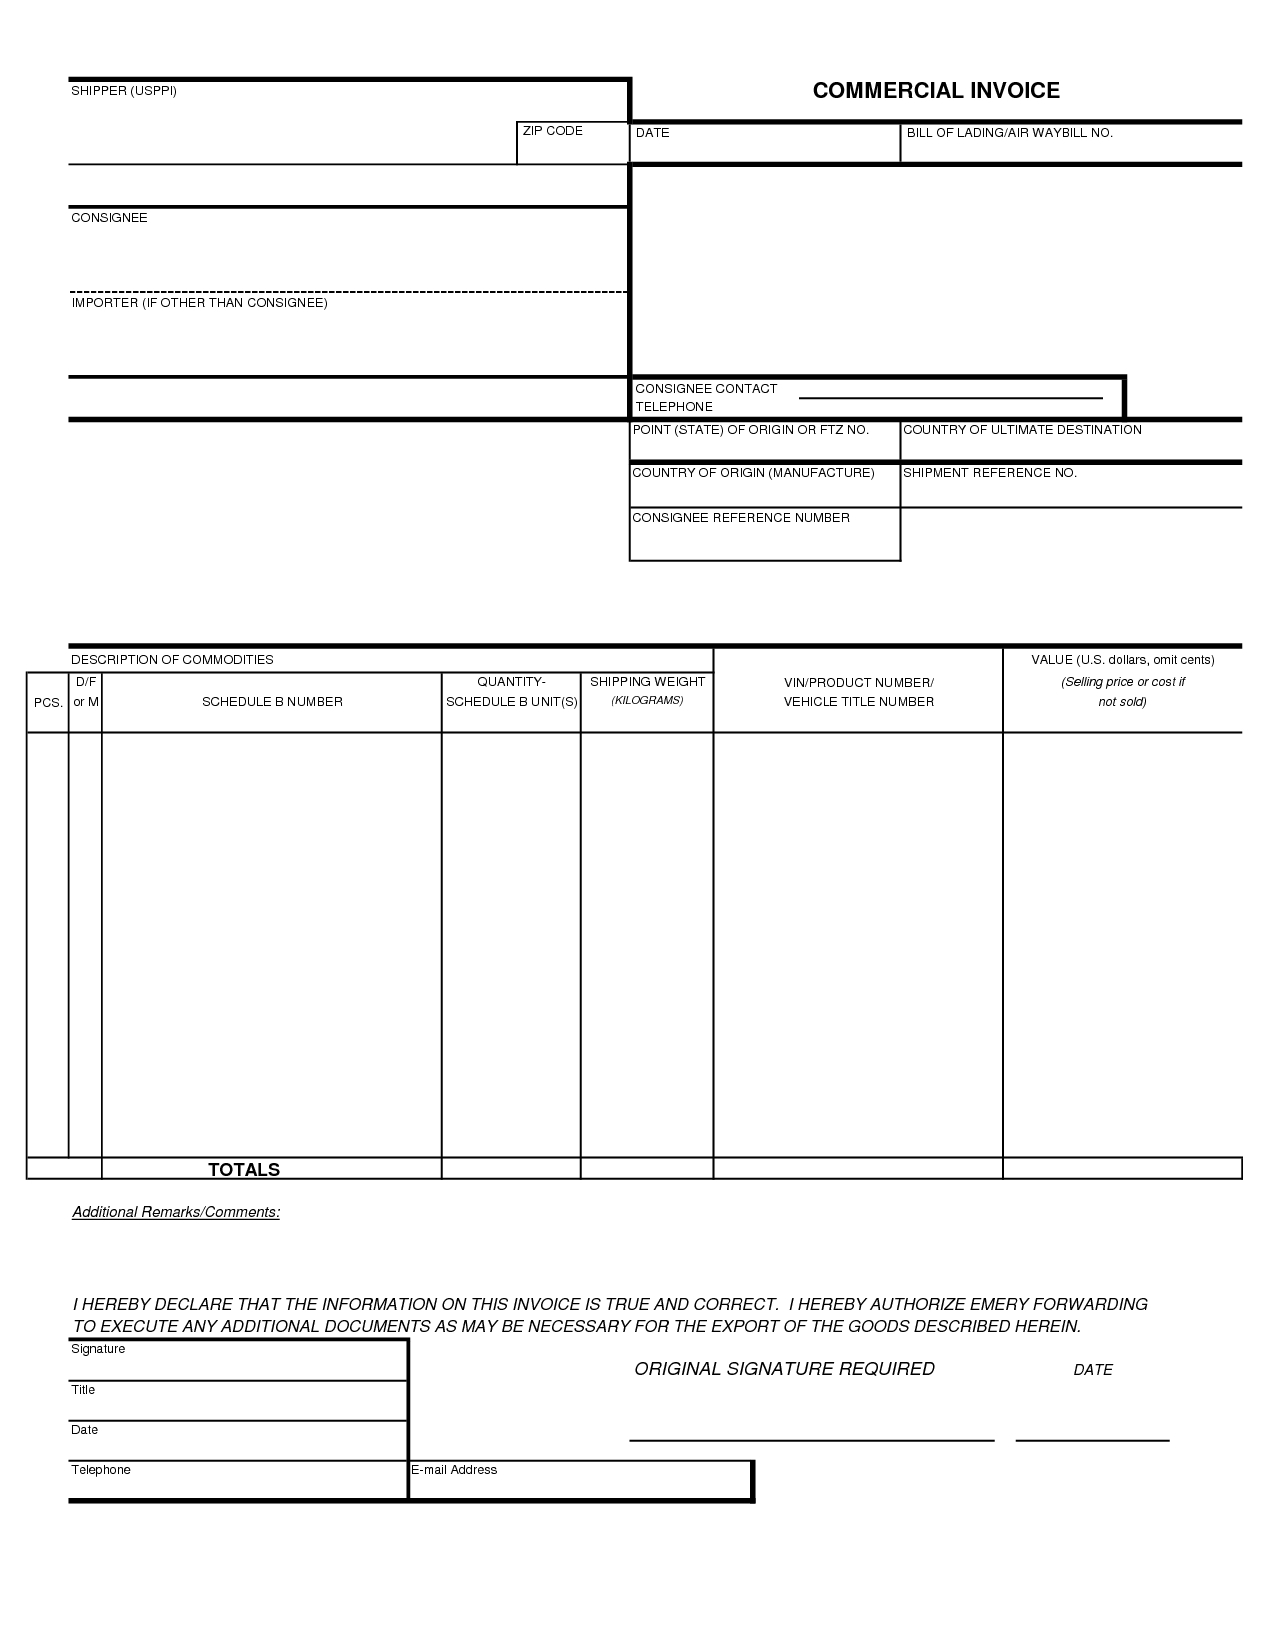 commercial invoice template ups residers ups commercial invoice form